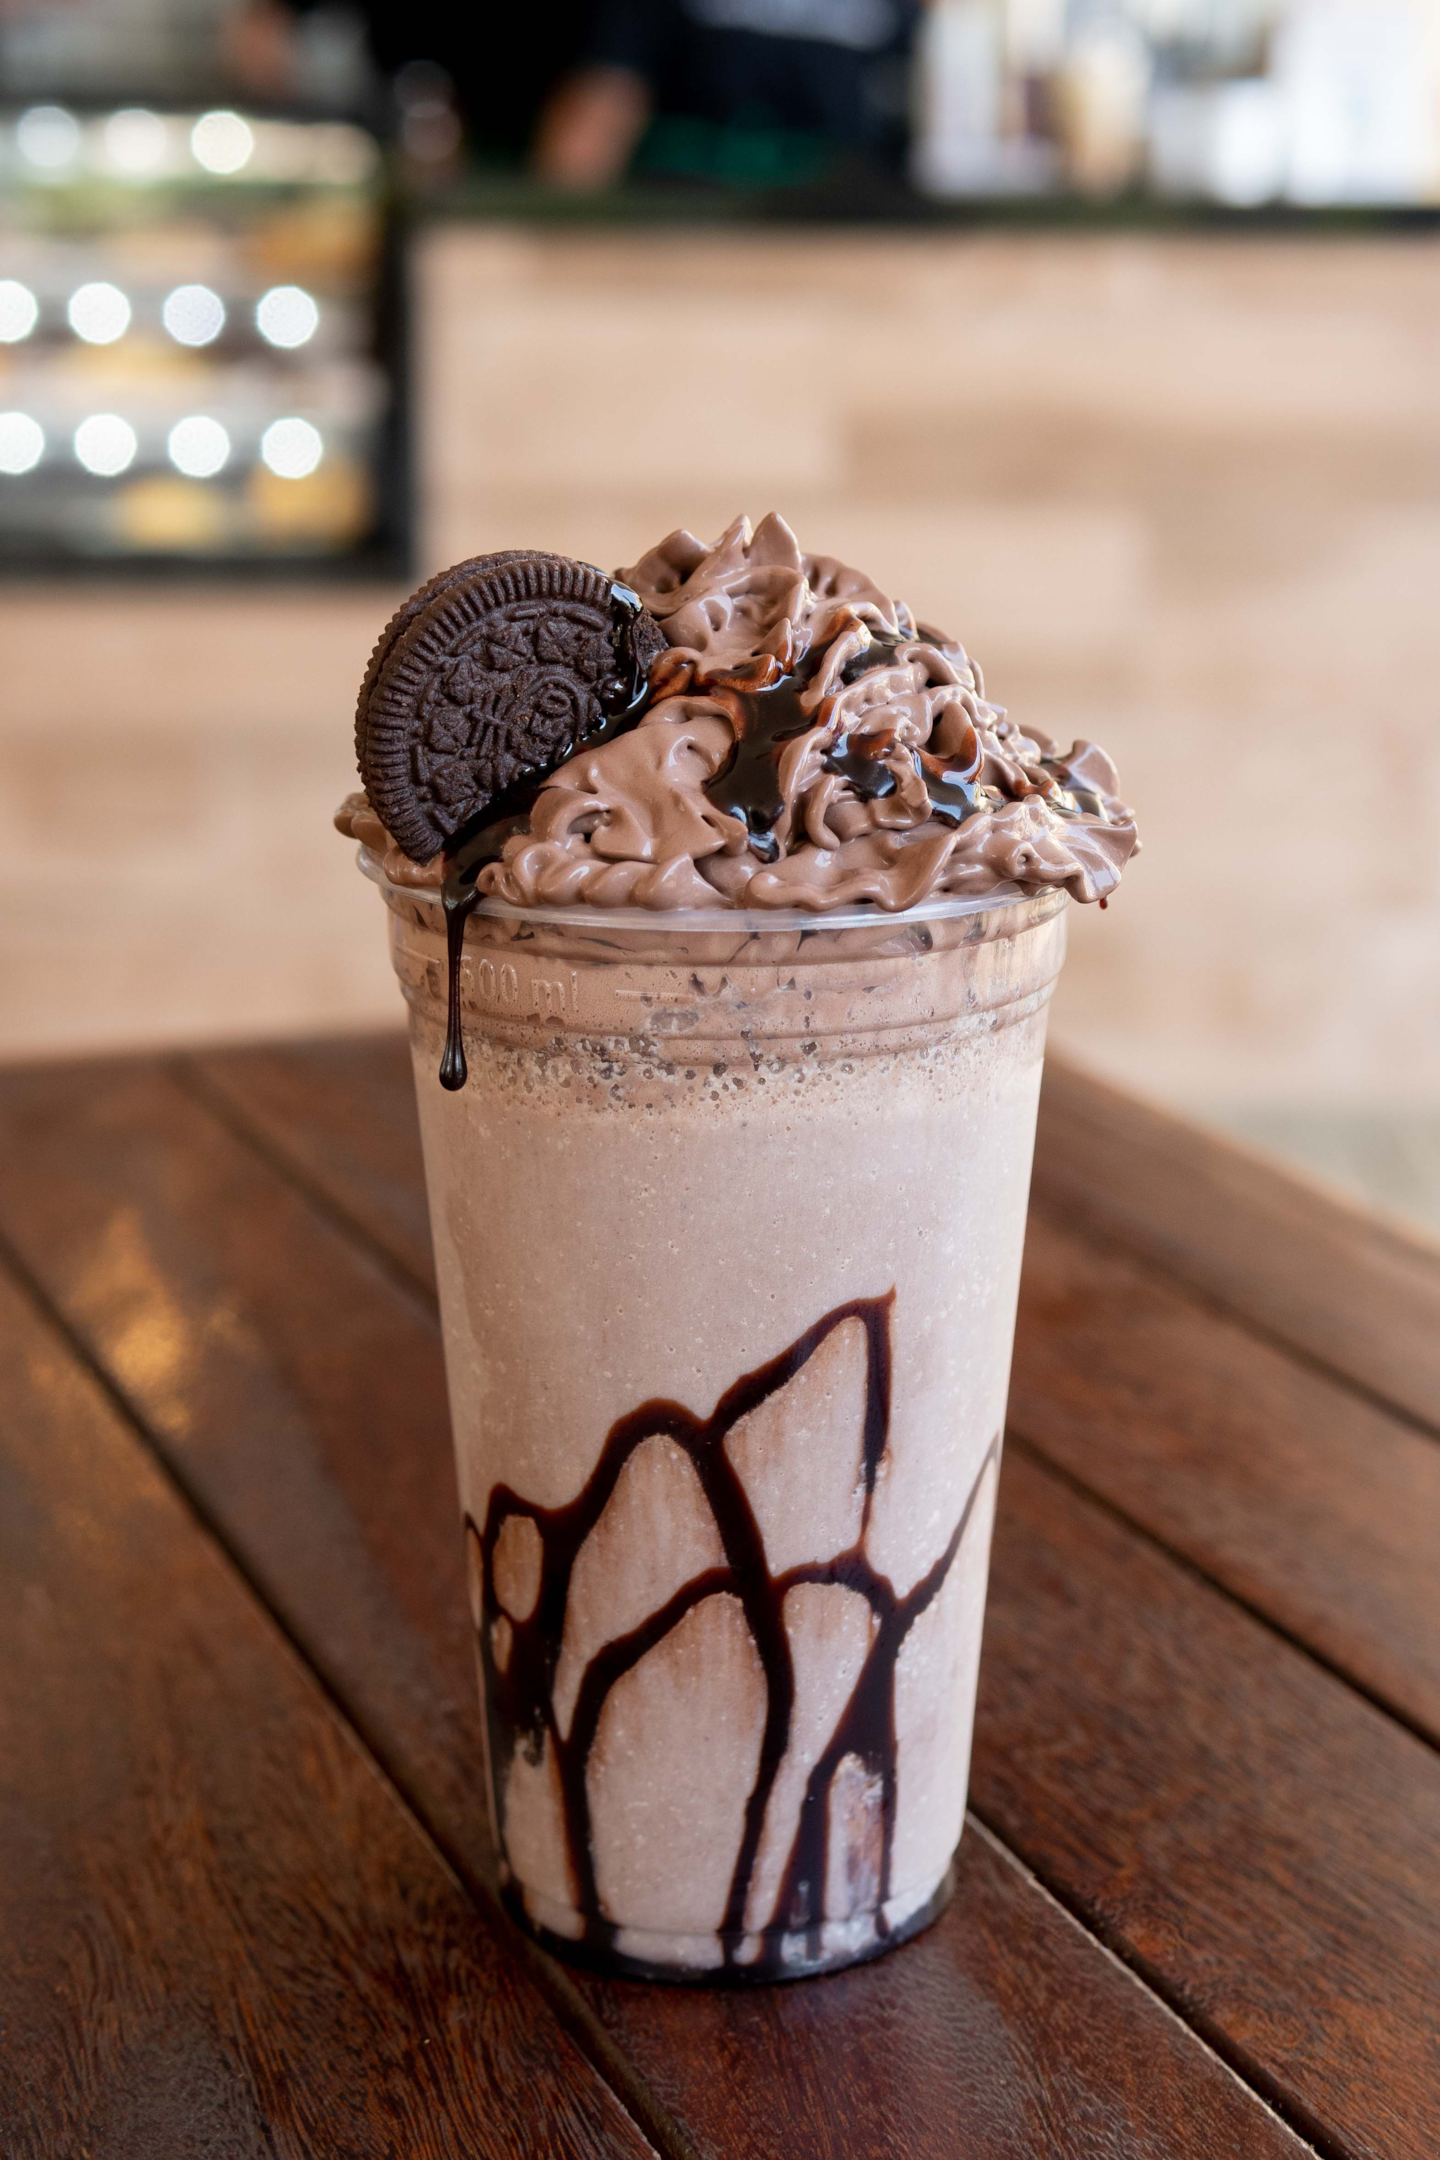 a mocha frappuccino is a great example of sugar sweetened beverages